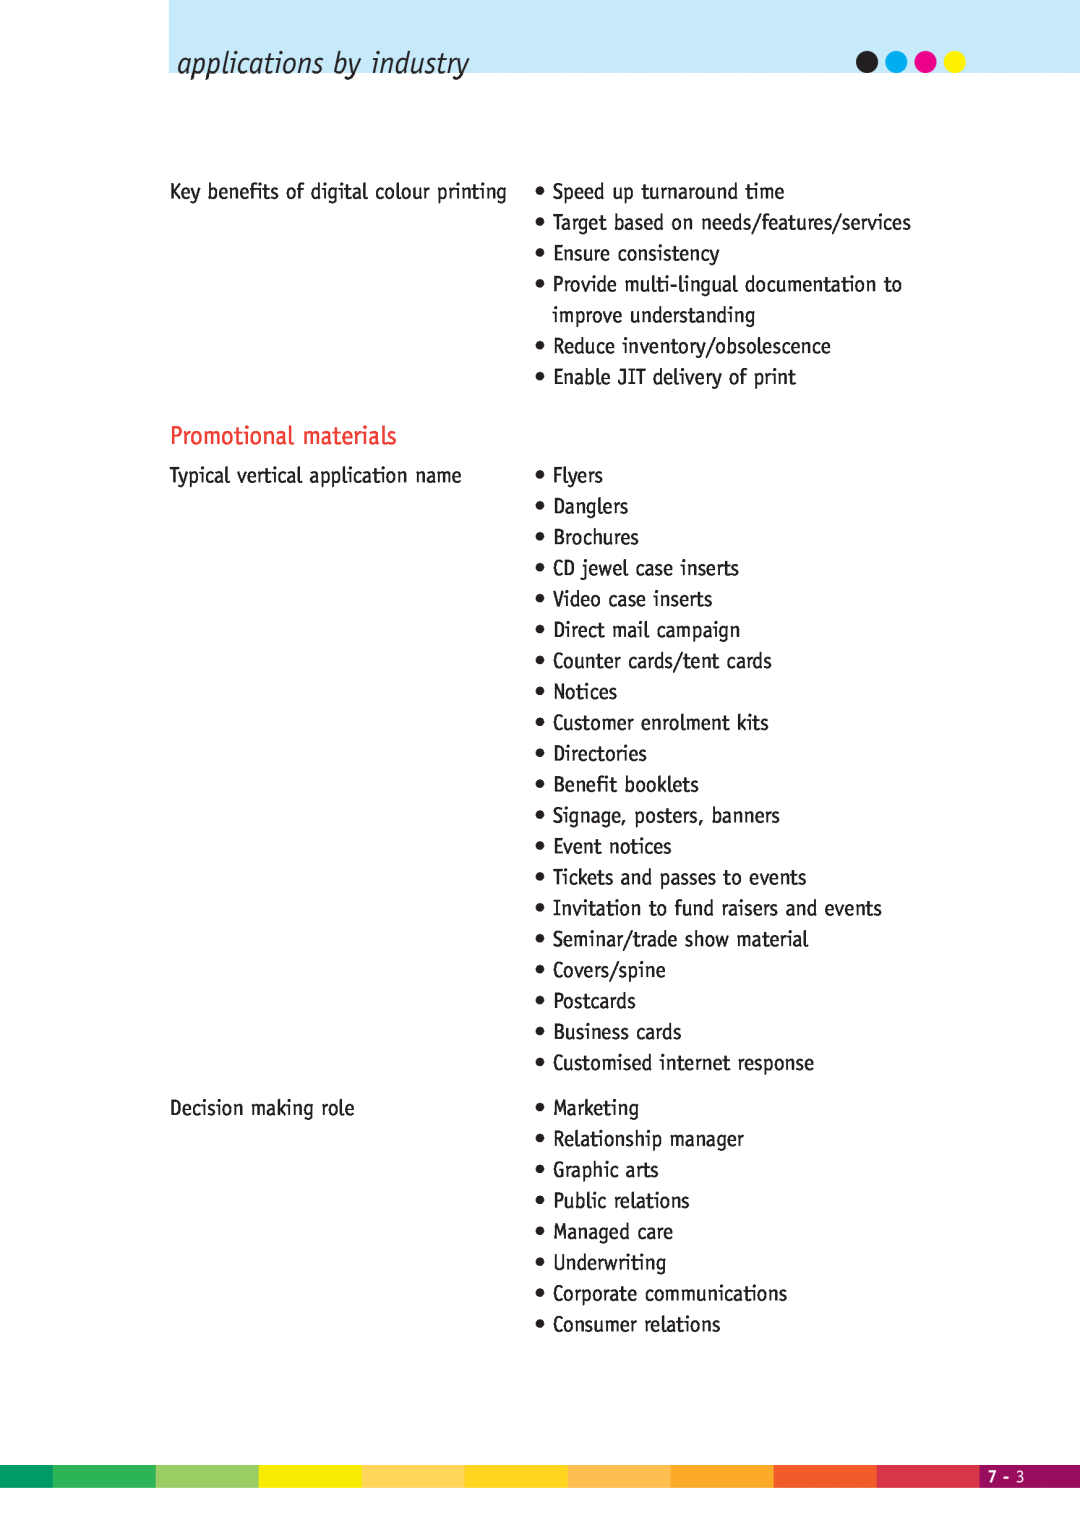 Xerox 2000 manual applications by industry, Promotional materials 